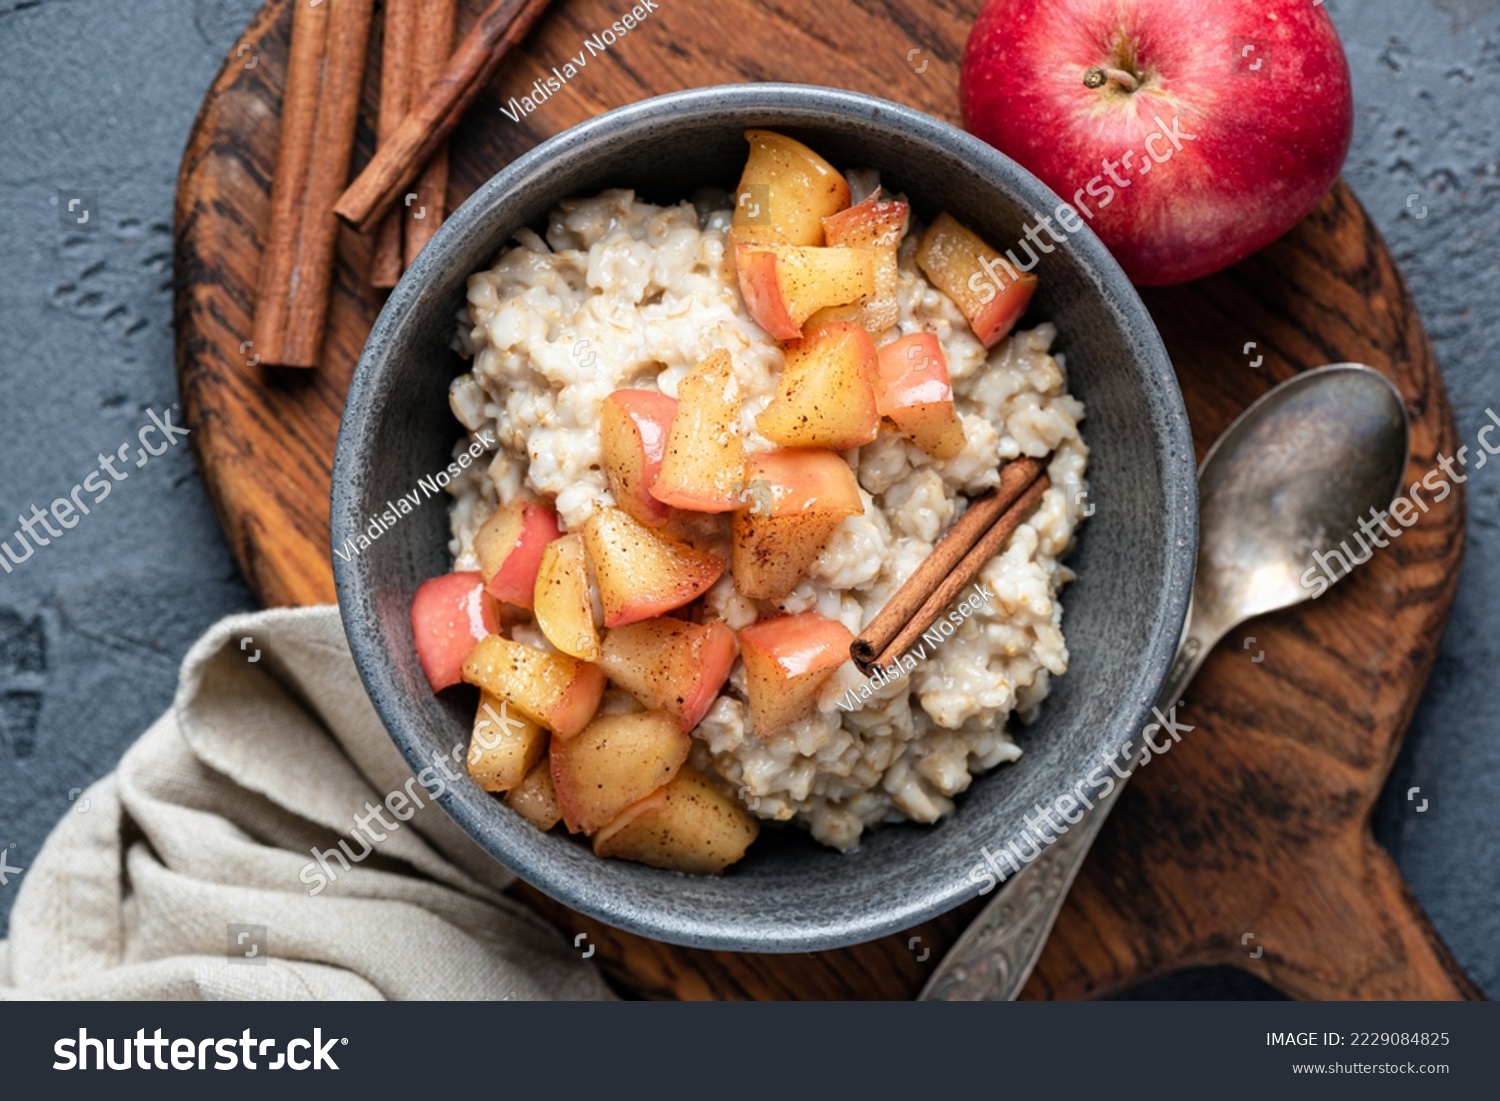 Oatmeal porridge with apple and cinnamon in bowl, top view. Healthy breakfast meal #2229084825